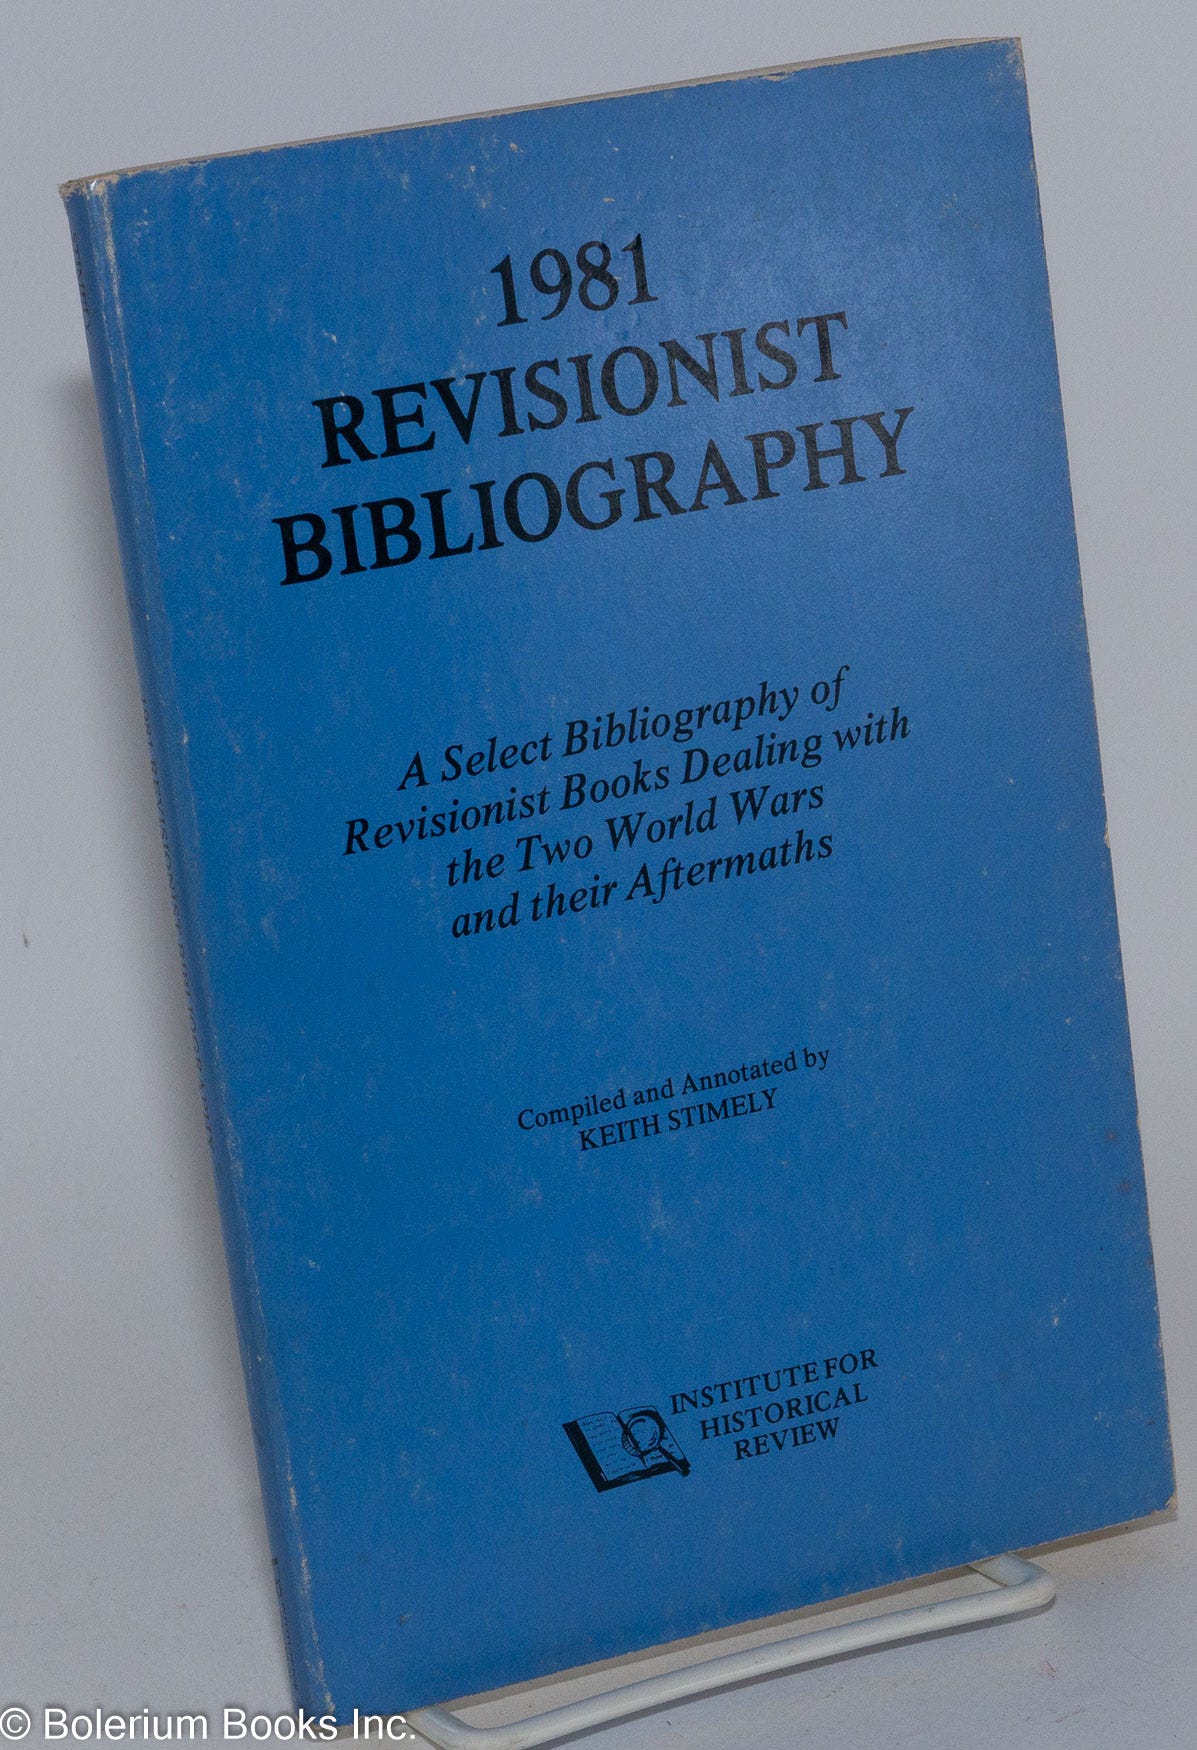 1981 Revisionist Bibliography, compiled and Annotated by Keith Stimely.  Introduction by Lewis Brandon. Inspired by Harry Elmer Barnes by Stimely,  Keith, compiler-annotator. Lewis Brandon, introduction: Paperback (1981) |  Bolerium Books Inc.